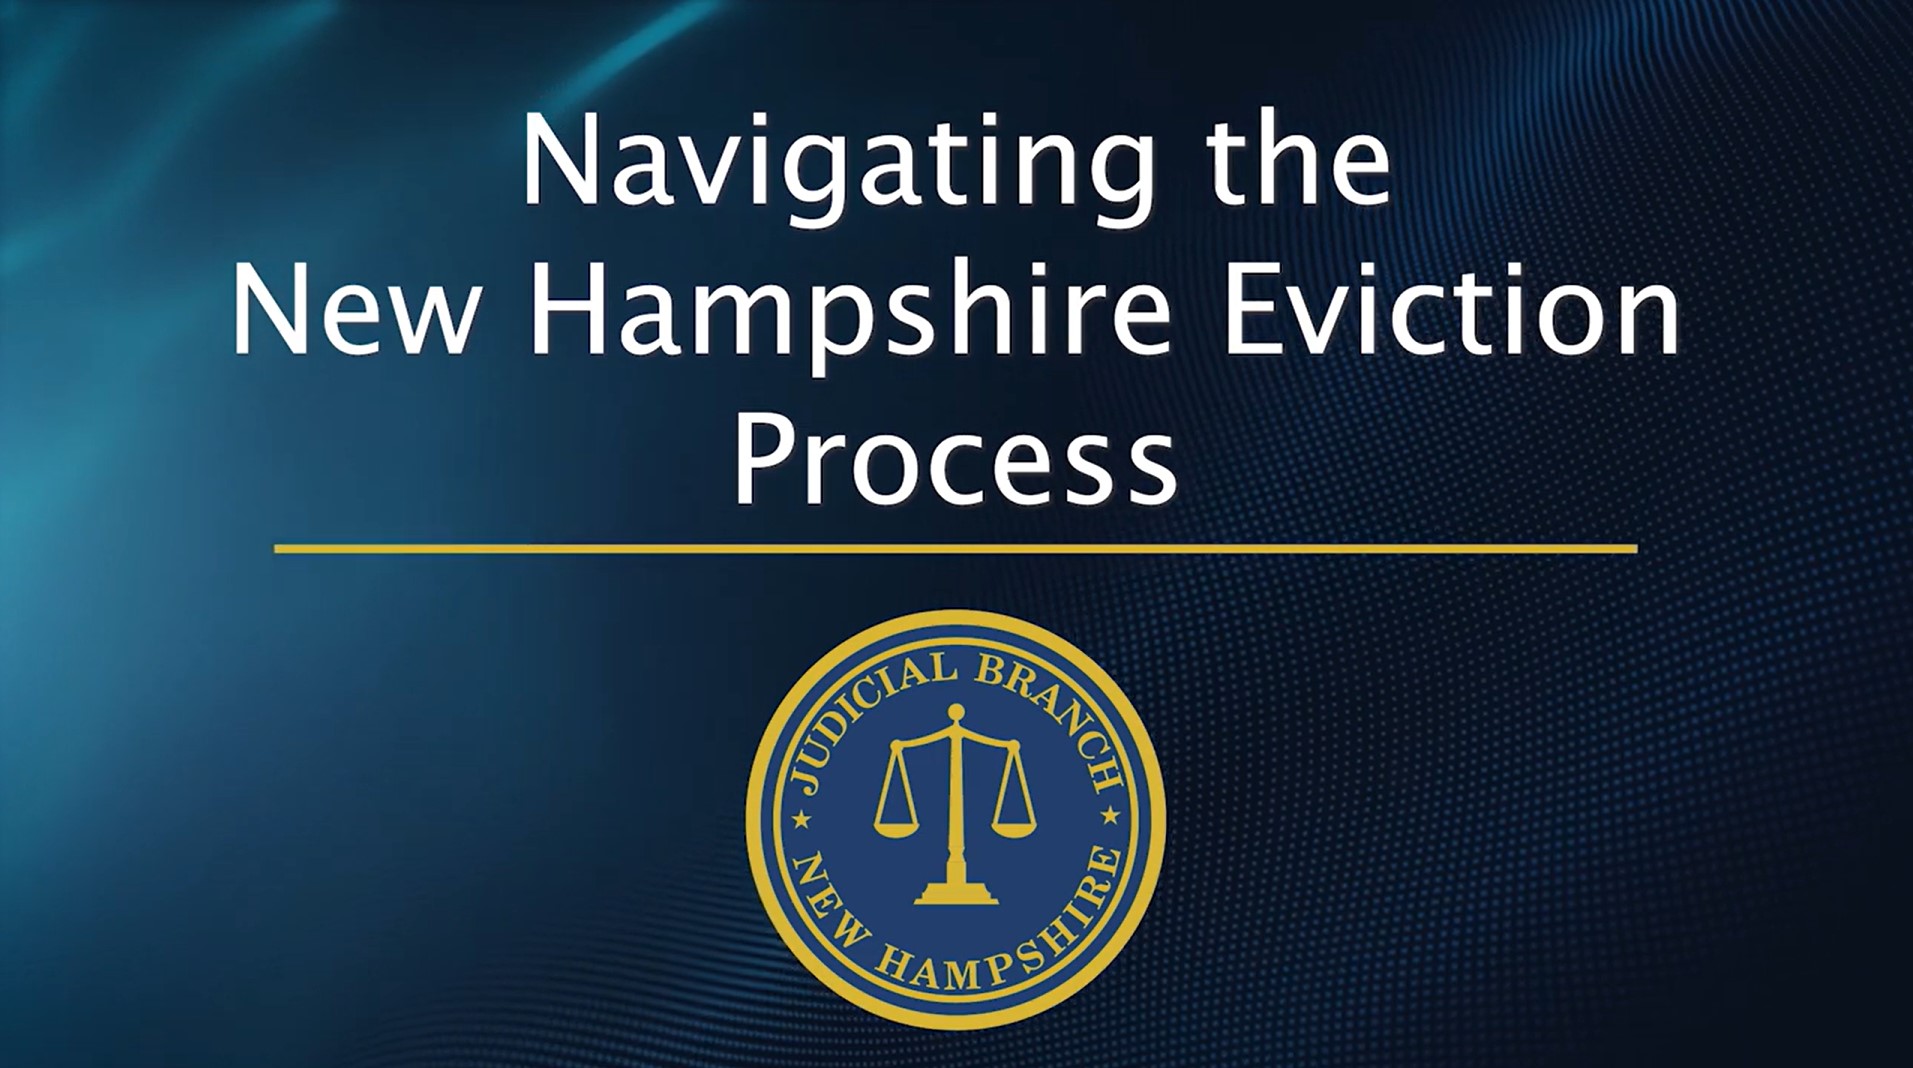 Text on a blue background that says Navigating the New Hampshire Eviction Process. Below it is the NHJB seal.